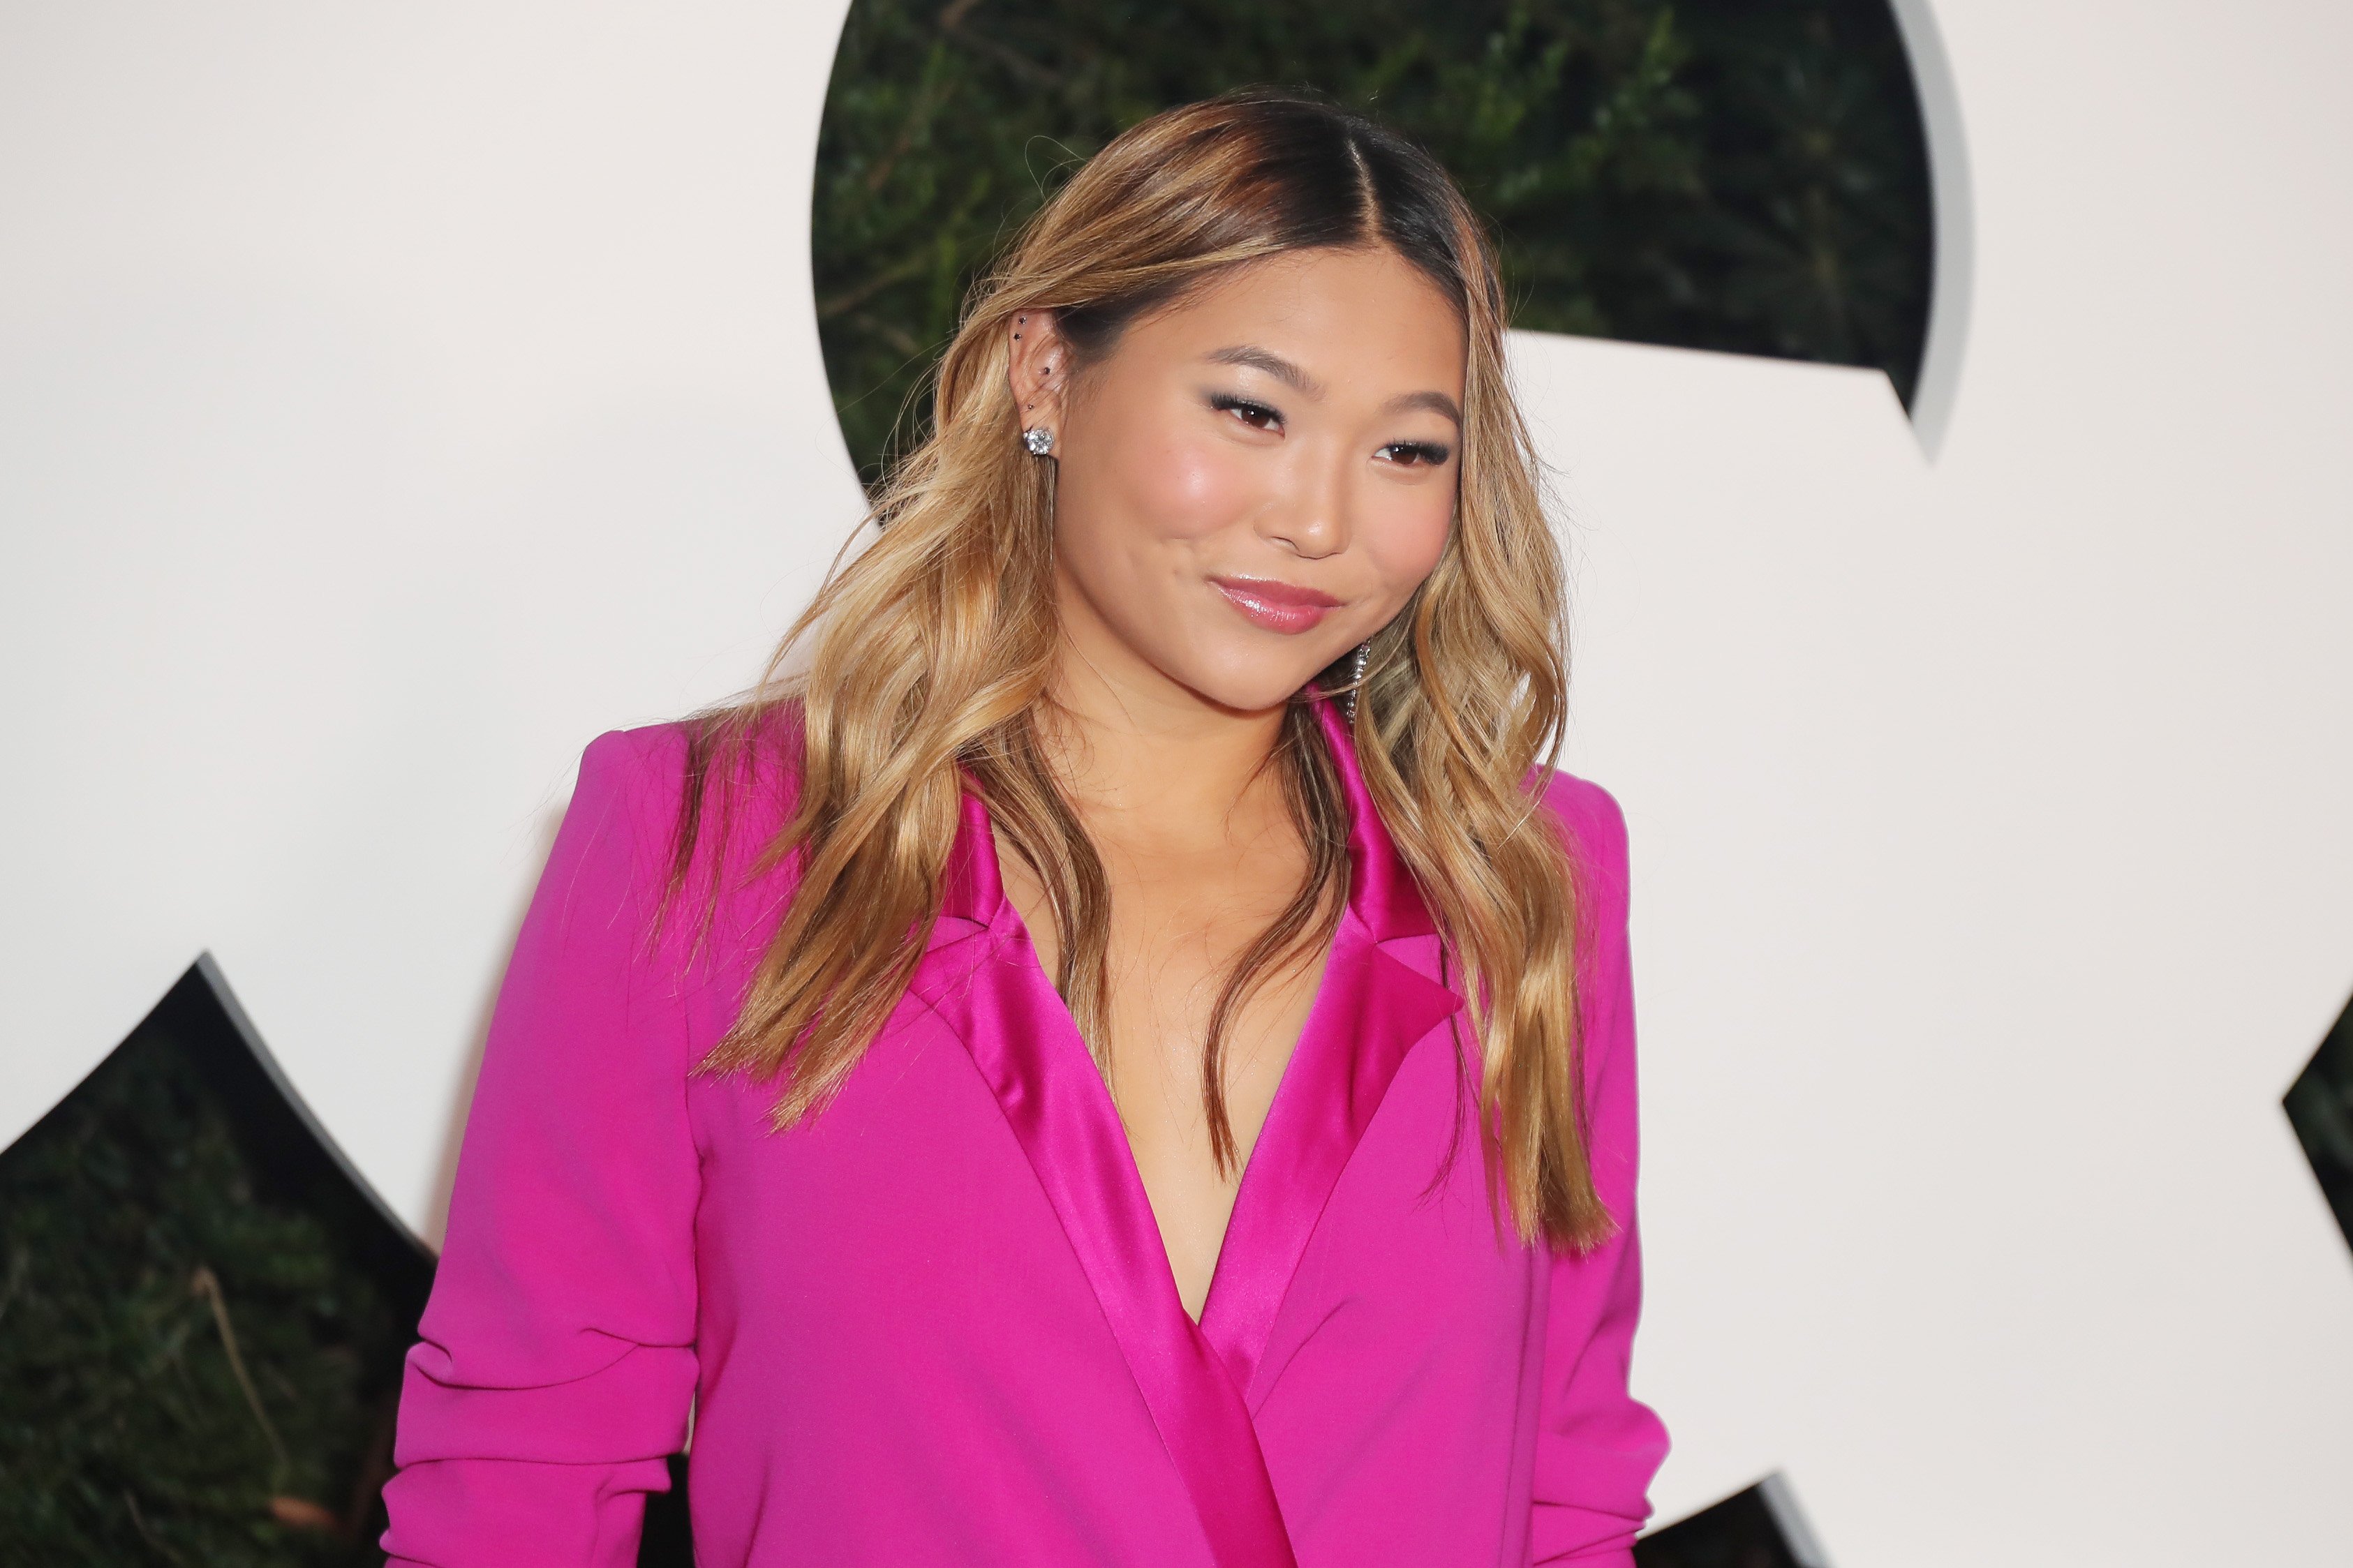 Chloe Kim dressed in a pink outfit at the GQ Men Of The Year Celebration